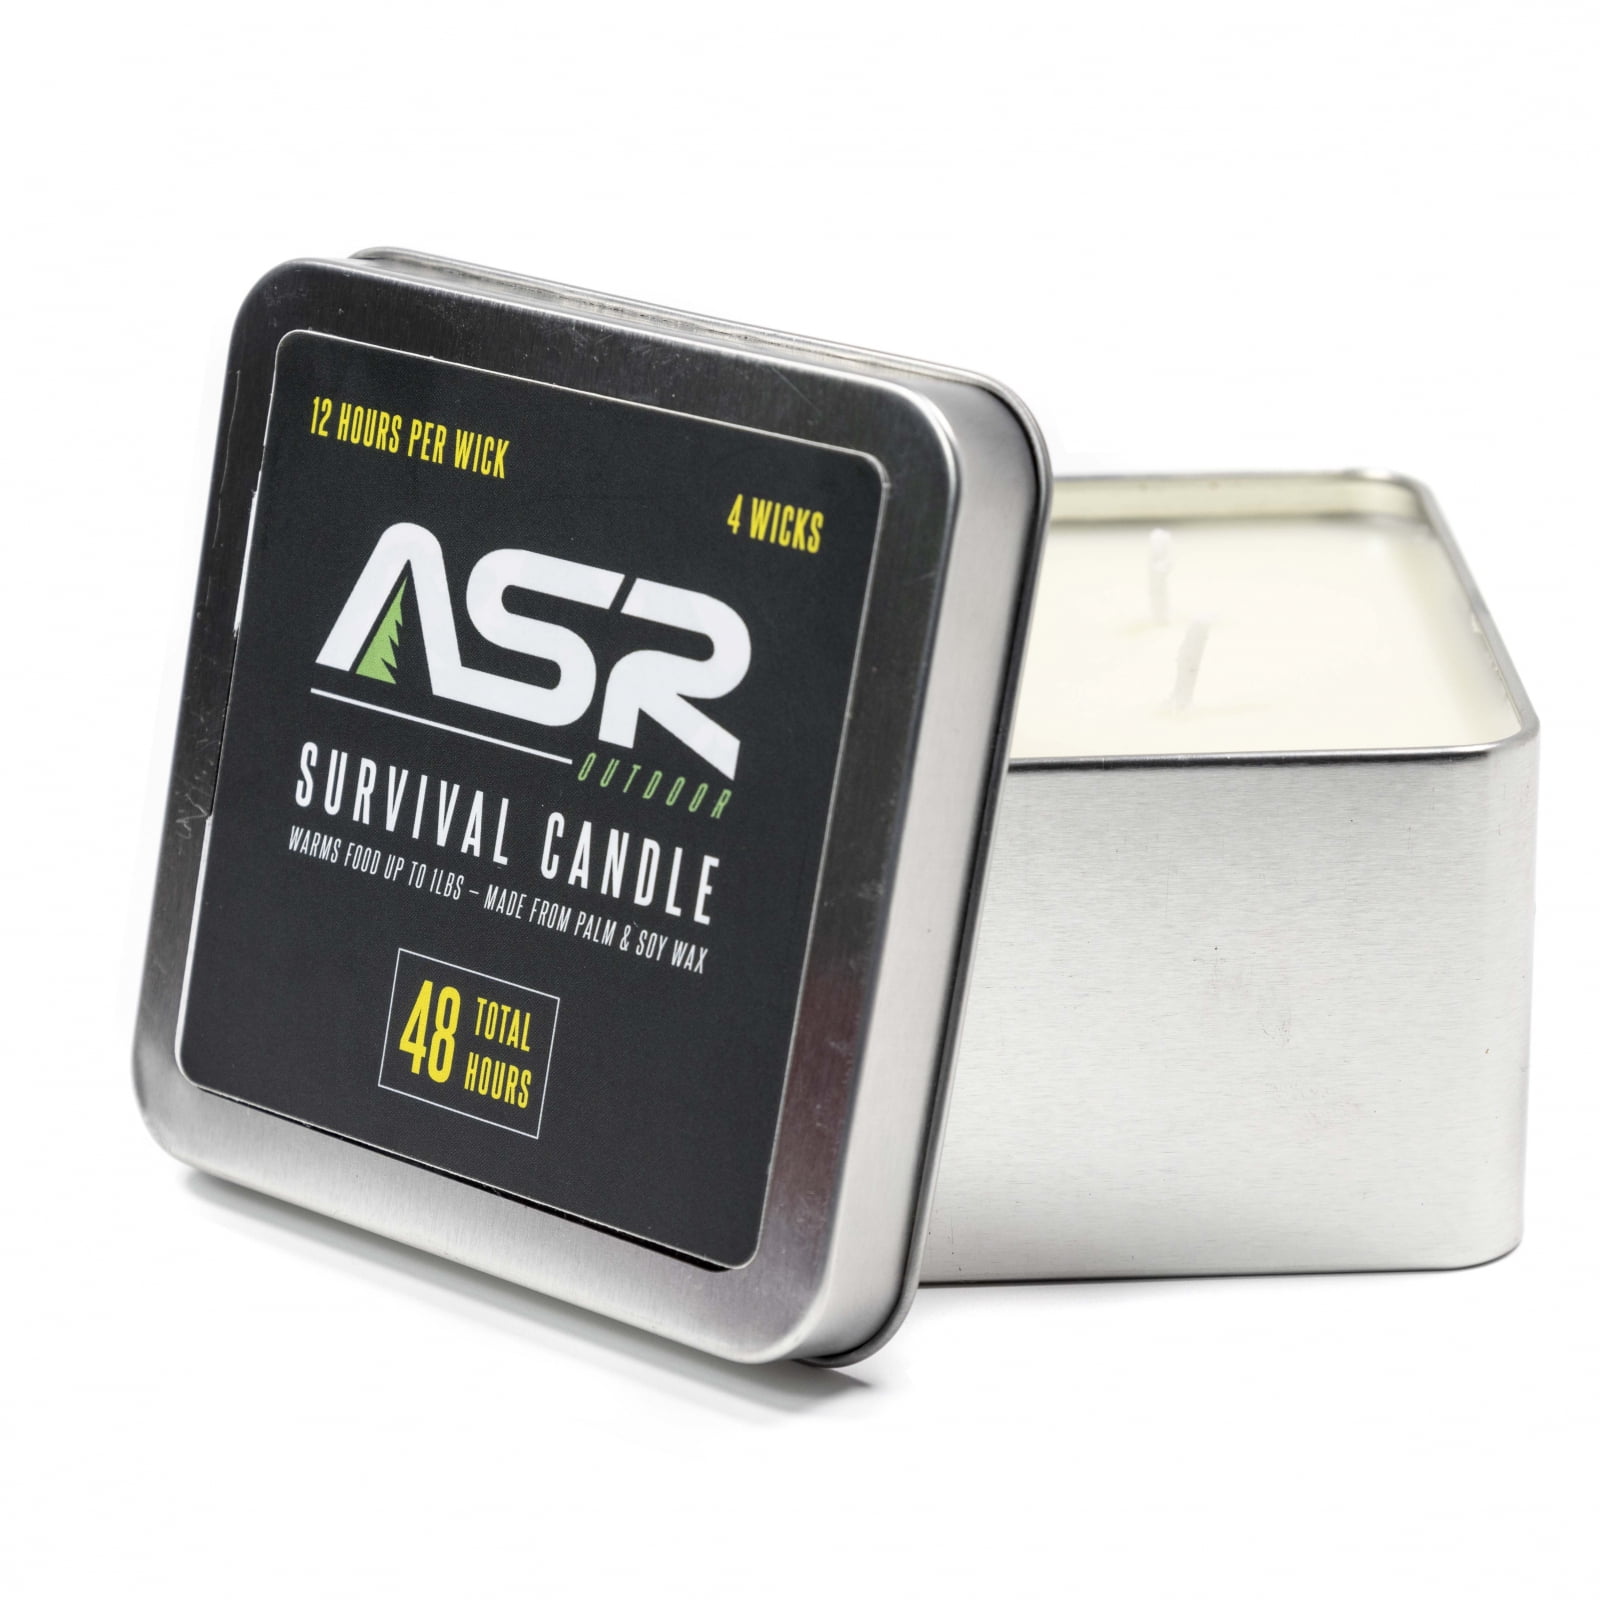 ASR Outdoor 48 Hour Camping Survival Emergency Light Wax Candle Fire  Starter in Portable Tin Box, 4 Wick 